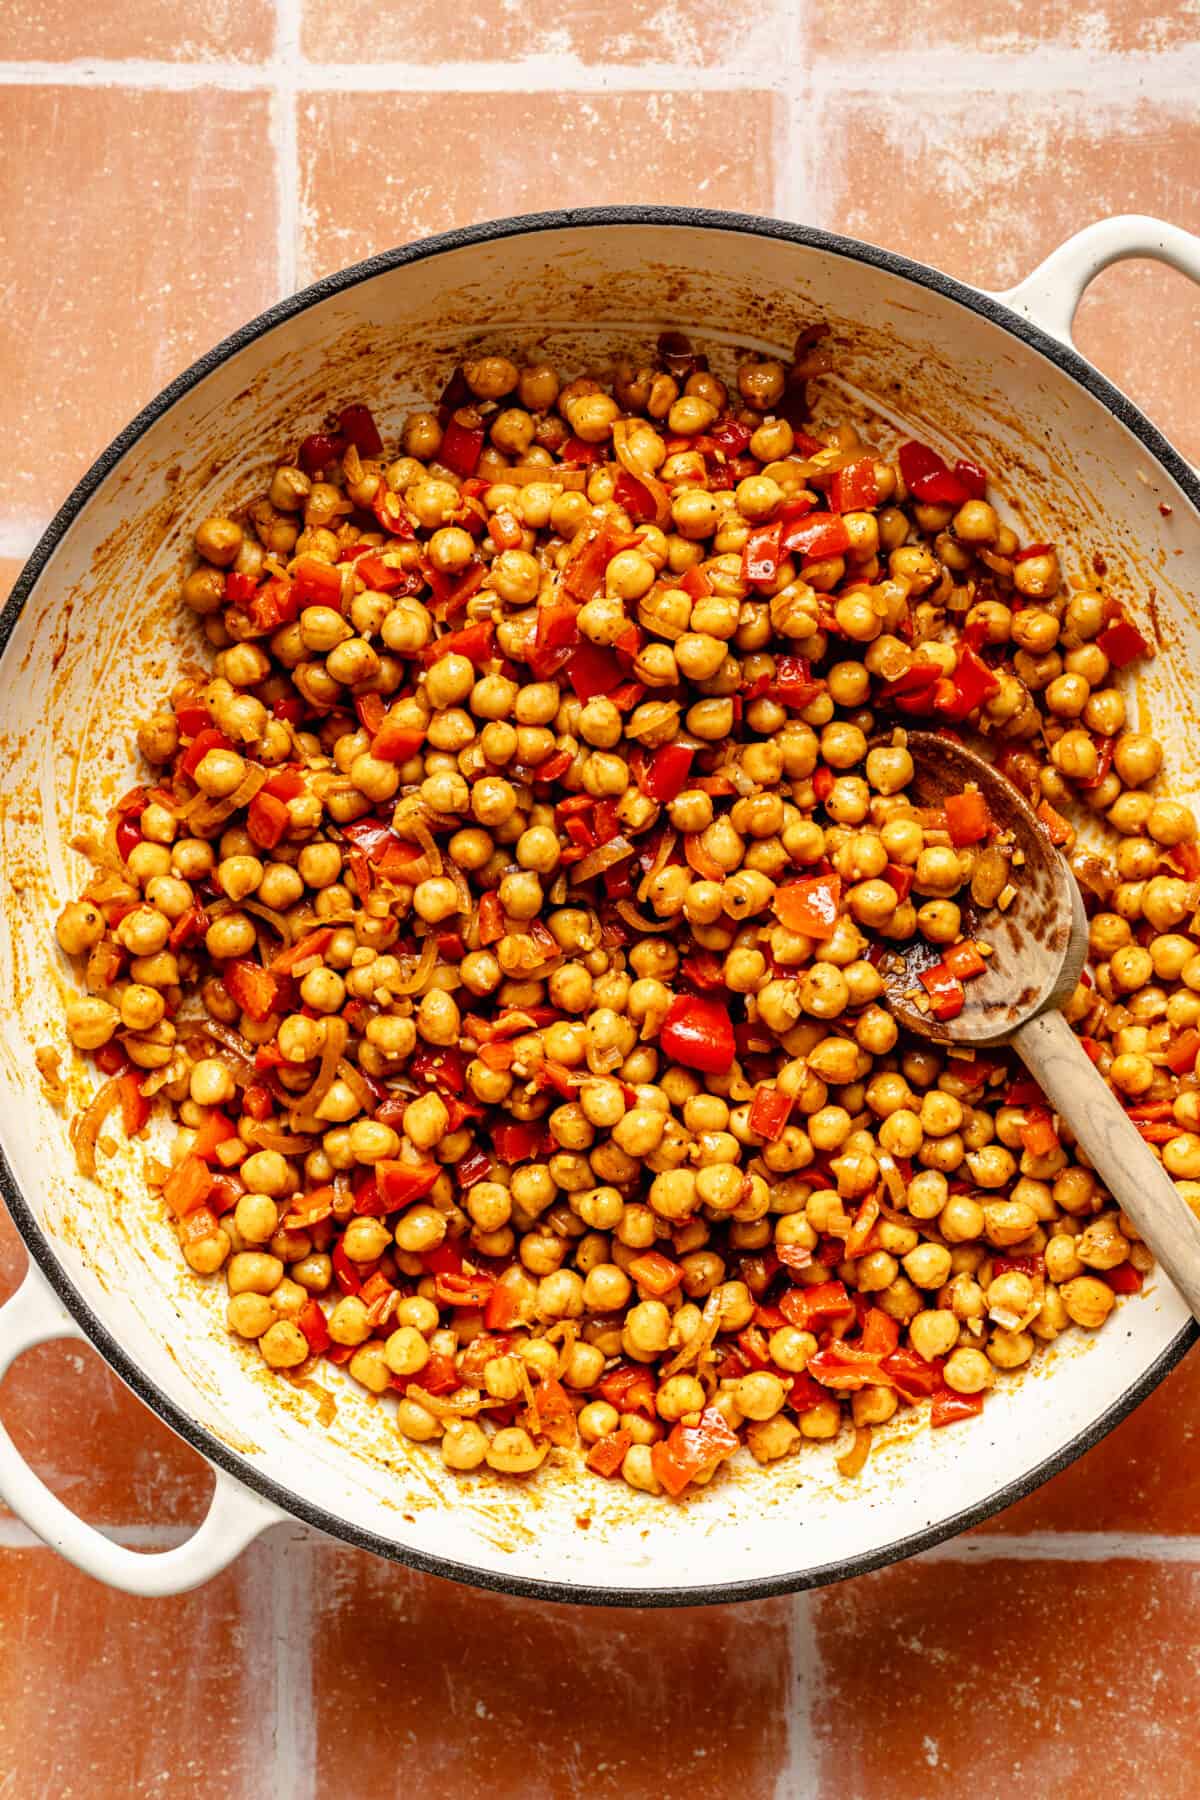 Chickpeas and other ingredients in a white skillet.